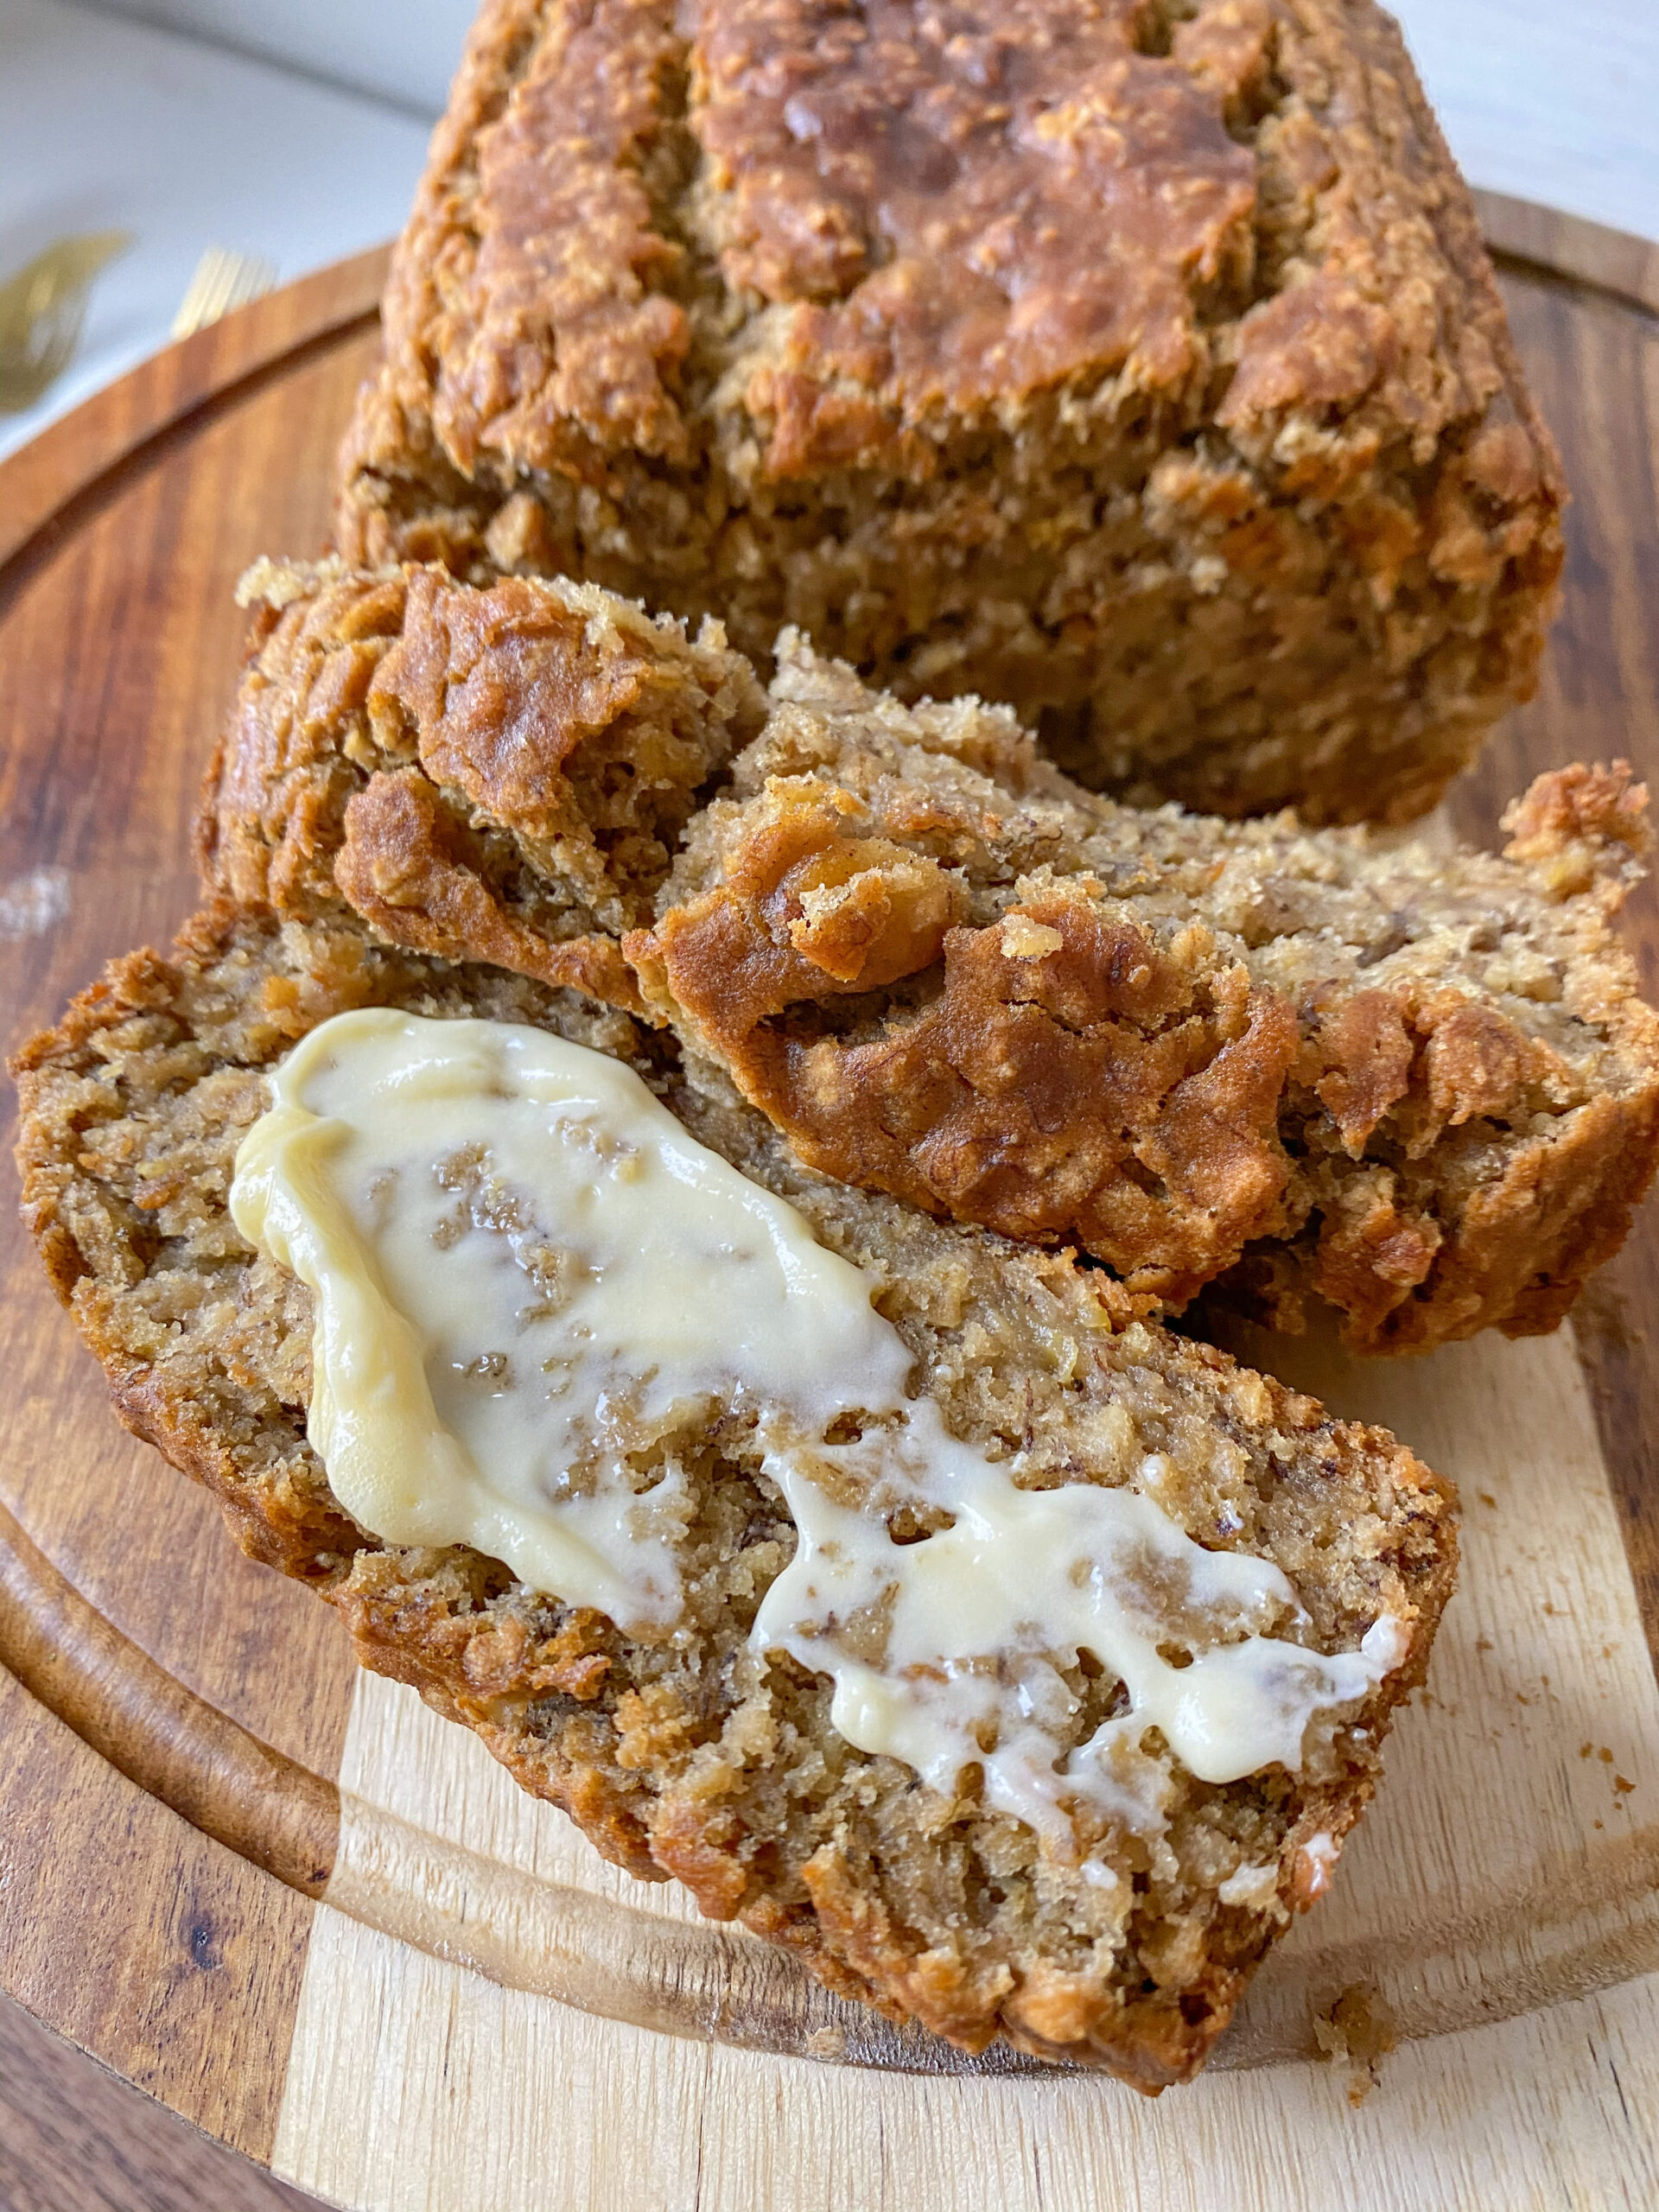 Slices of gluten free banana bread with butter.